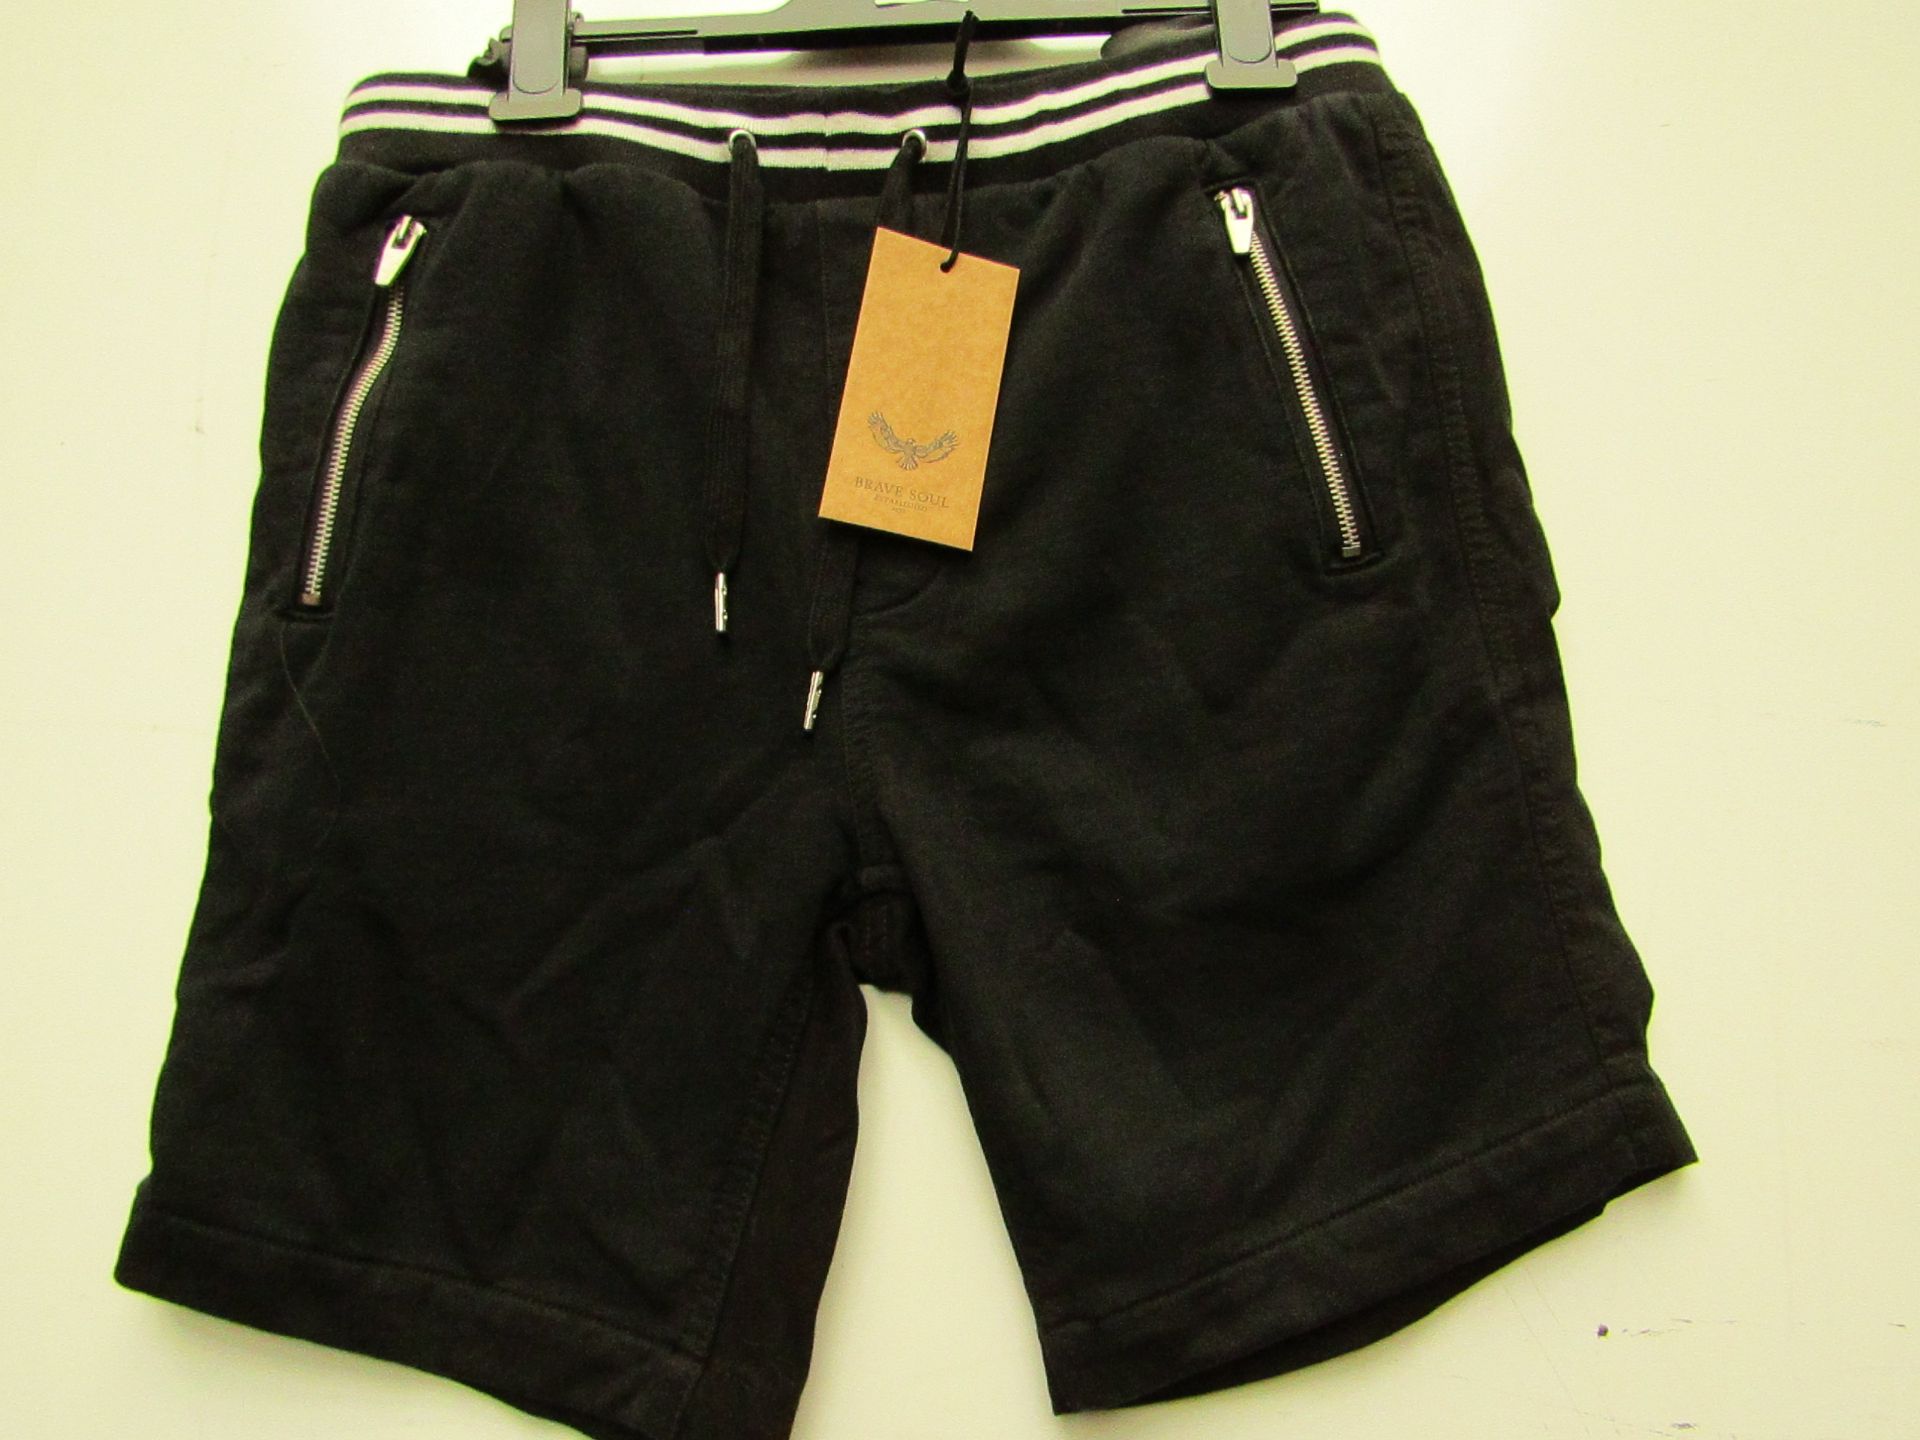 Brave Soul Mens Black Shorts size M with tag